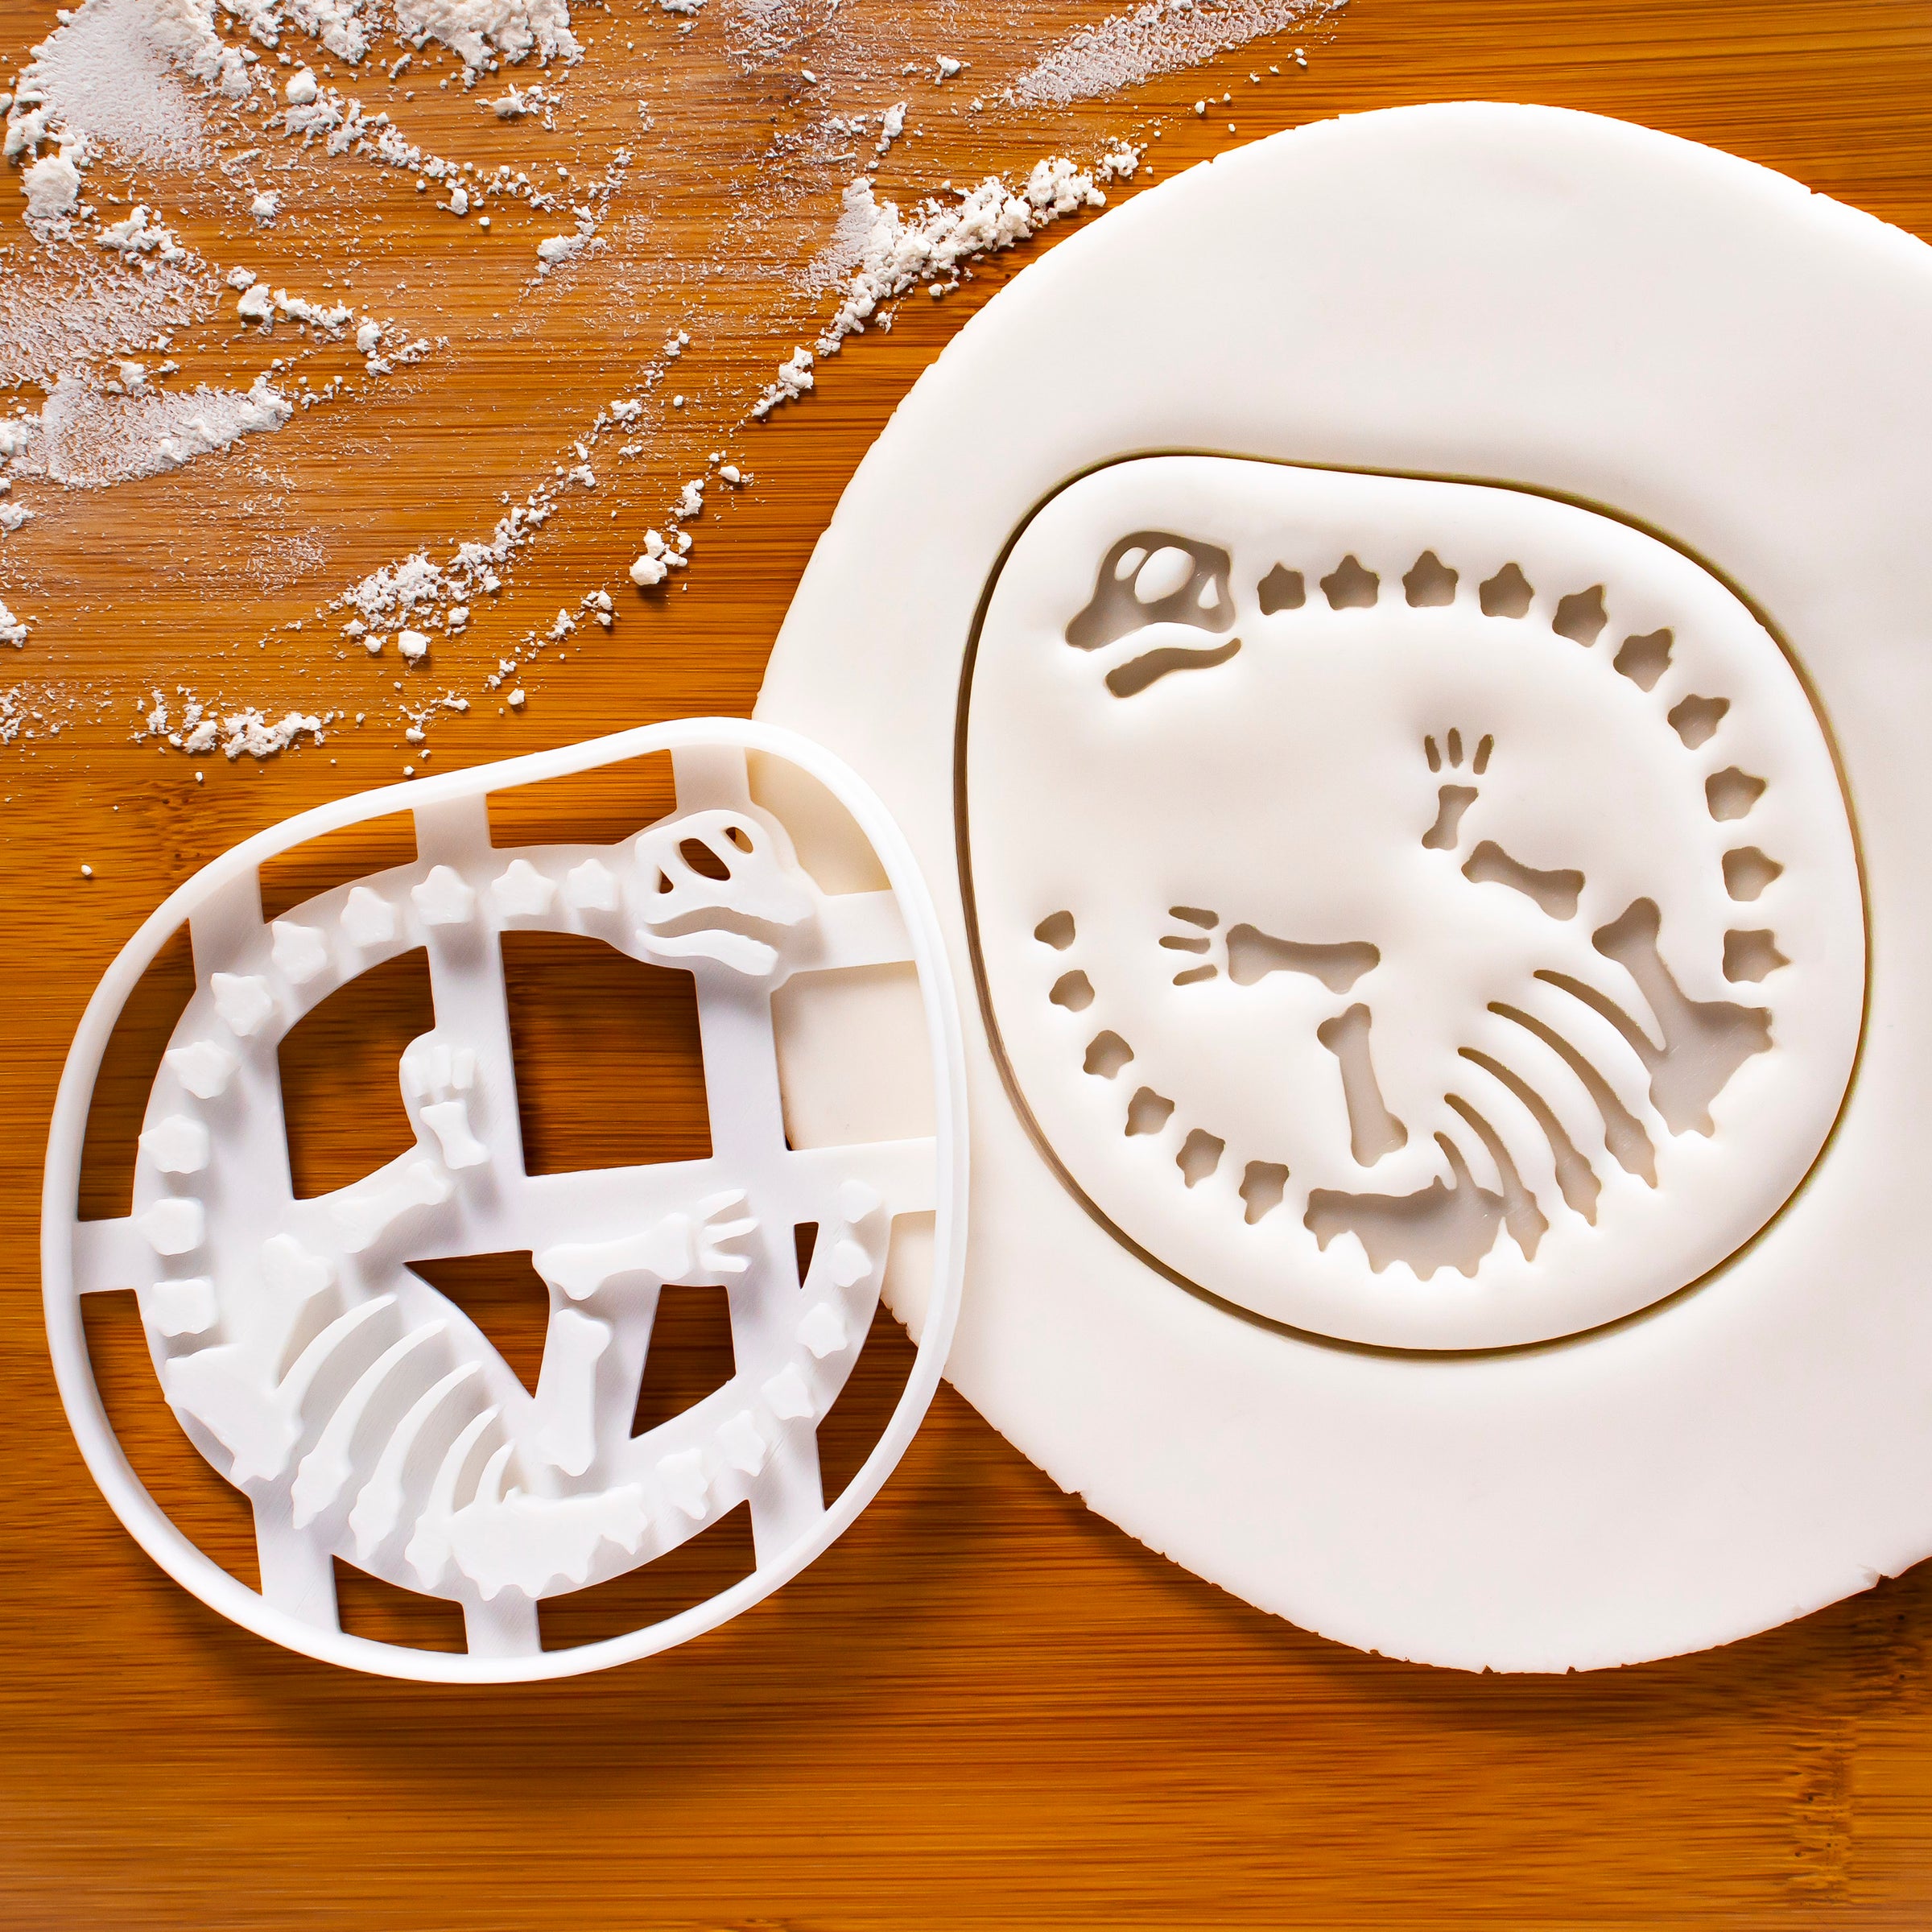 Dinosaur Cookie Cutters – Paleontological Research Institution